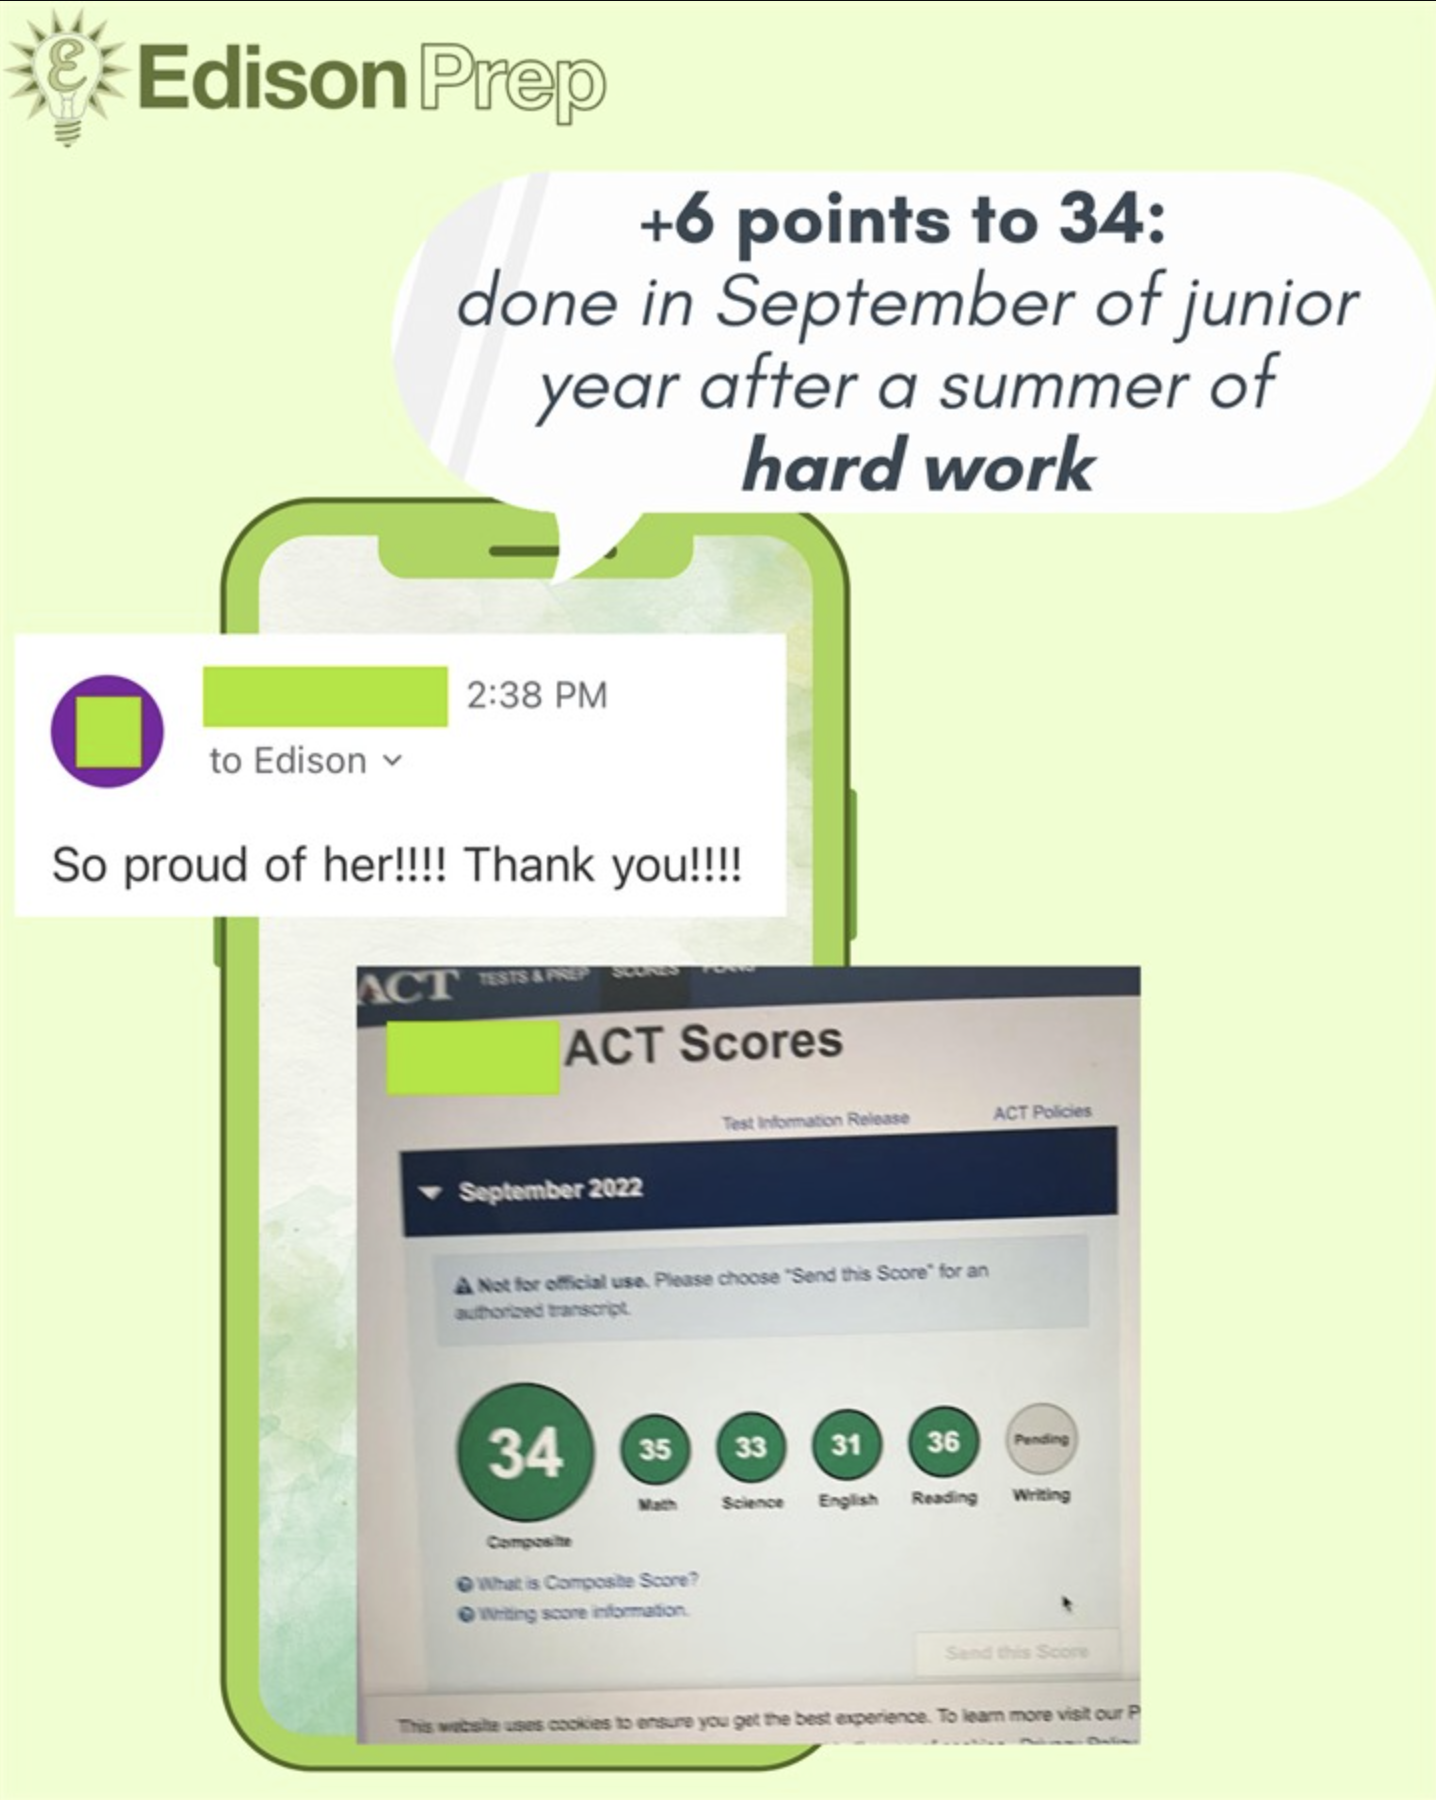 Graphic celebrating a student's ACT score increase, with a speech bubble stating '+6 points to 34: done in September of junior year after a summer of hard work'. A text message in the image expresses pride and gratitude, 'So proud of her!!!! Thank you!!!!'. An inset shows the ACT score report with a composite score of 34, and subsection scores of 35 in Math, 33 in Science, 31 in English, and 36 in Reading.